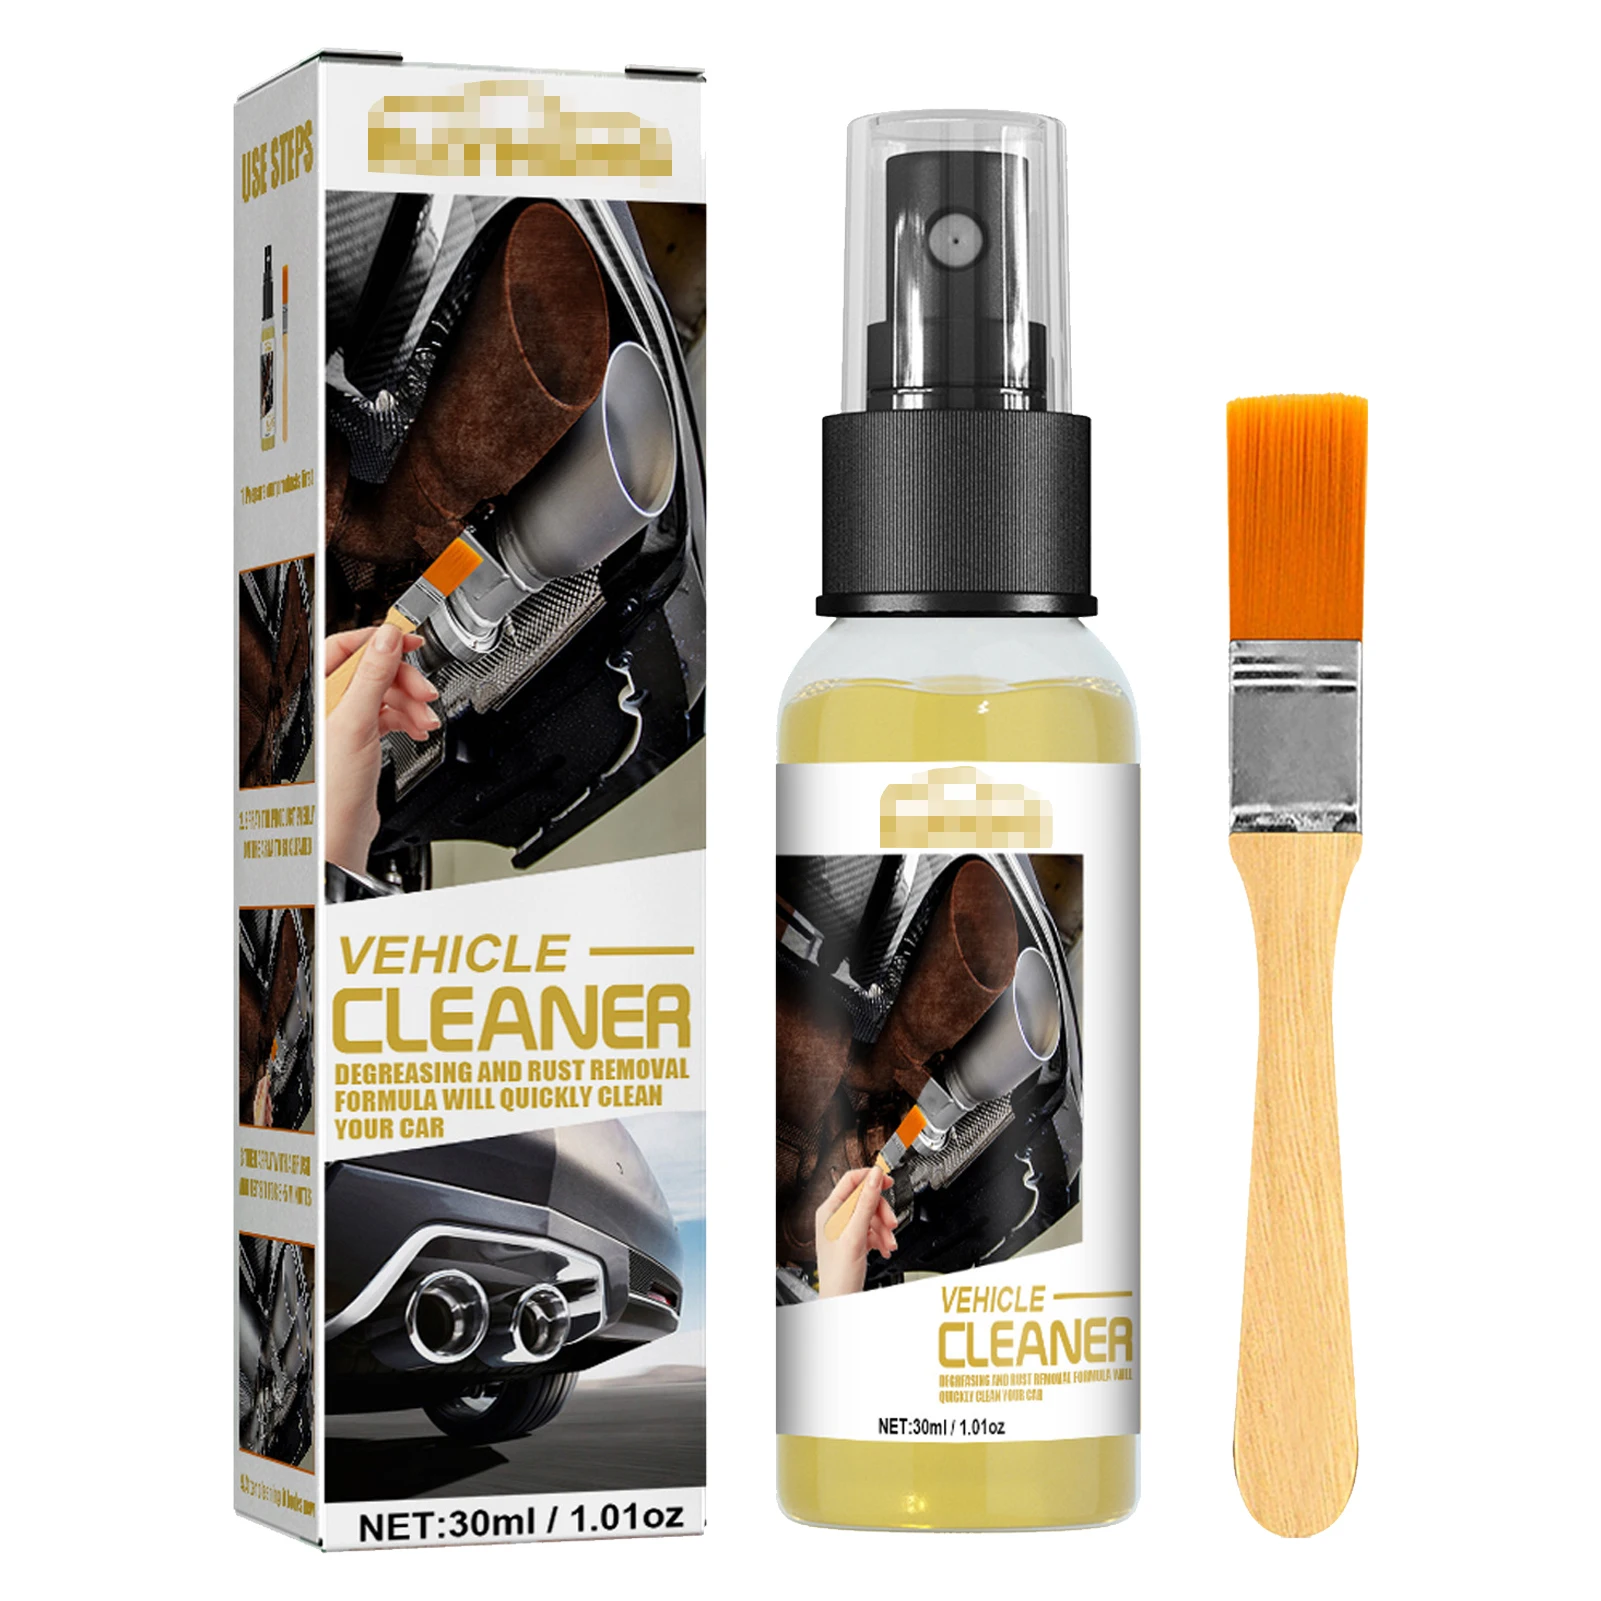 

Car Rust Remover Spray Wheel Cleaner For Car Detailing Removes Brake Dust Aluminum Alloy Mag Chrome Painted Clearcoated